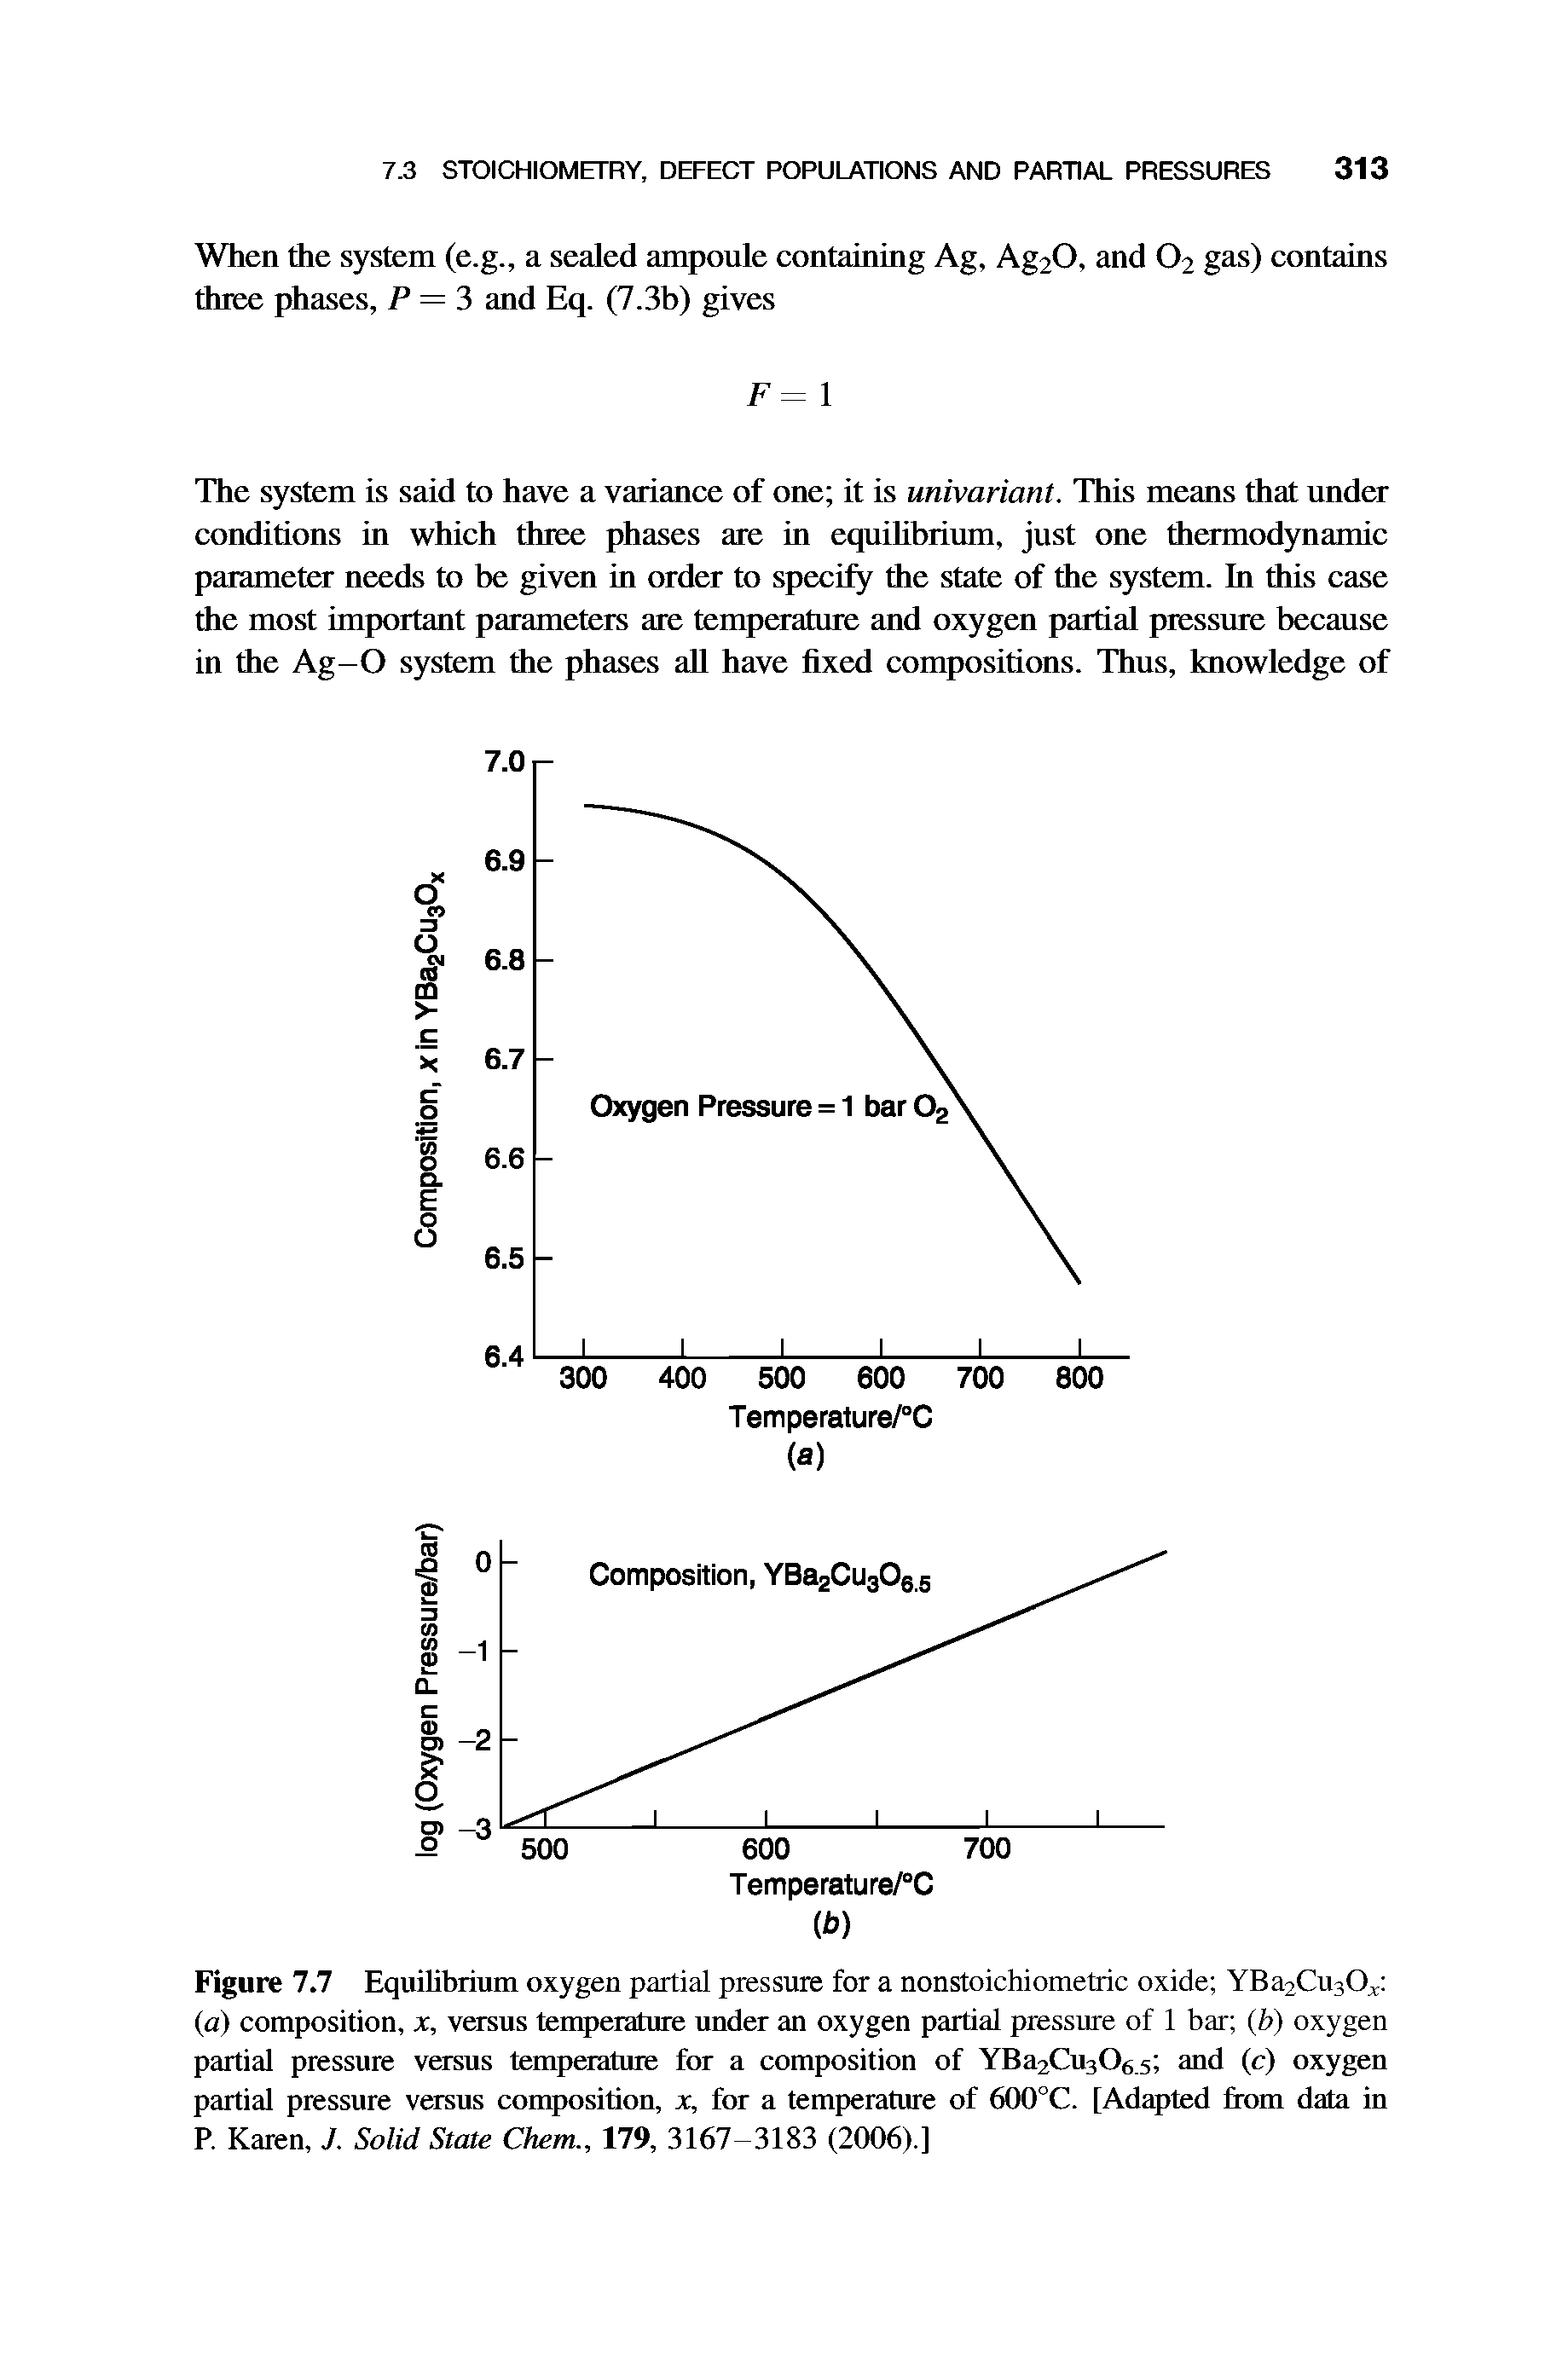 Figure 7.7 Equilibrium oxygen partial pressure for a nonstoichiometric oxide YBa2Cu3Ox (a) composition, x, versus temperature under an oxygen partial pressure of 1 bar (b) oxygen partial pressure versus temperature for a composition of YBa2Cu306.5 and (c) oxygen partial pressure versus composition, x, for a temperature of 600°C. [Adapted from data in P. Karen, J. Solid State Chem., 179, 3167-3183 (2006).]...